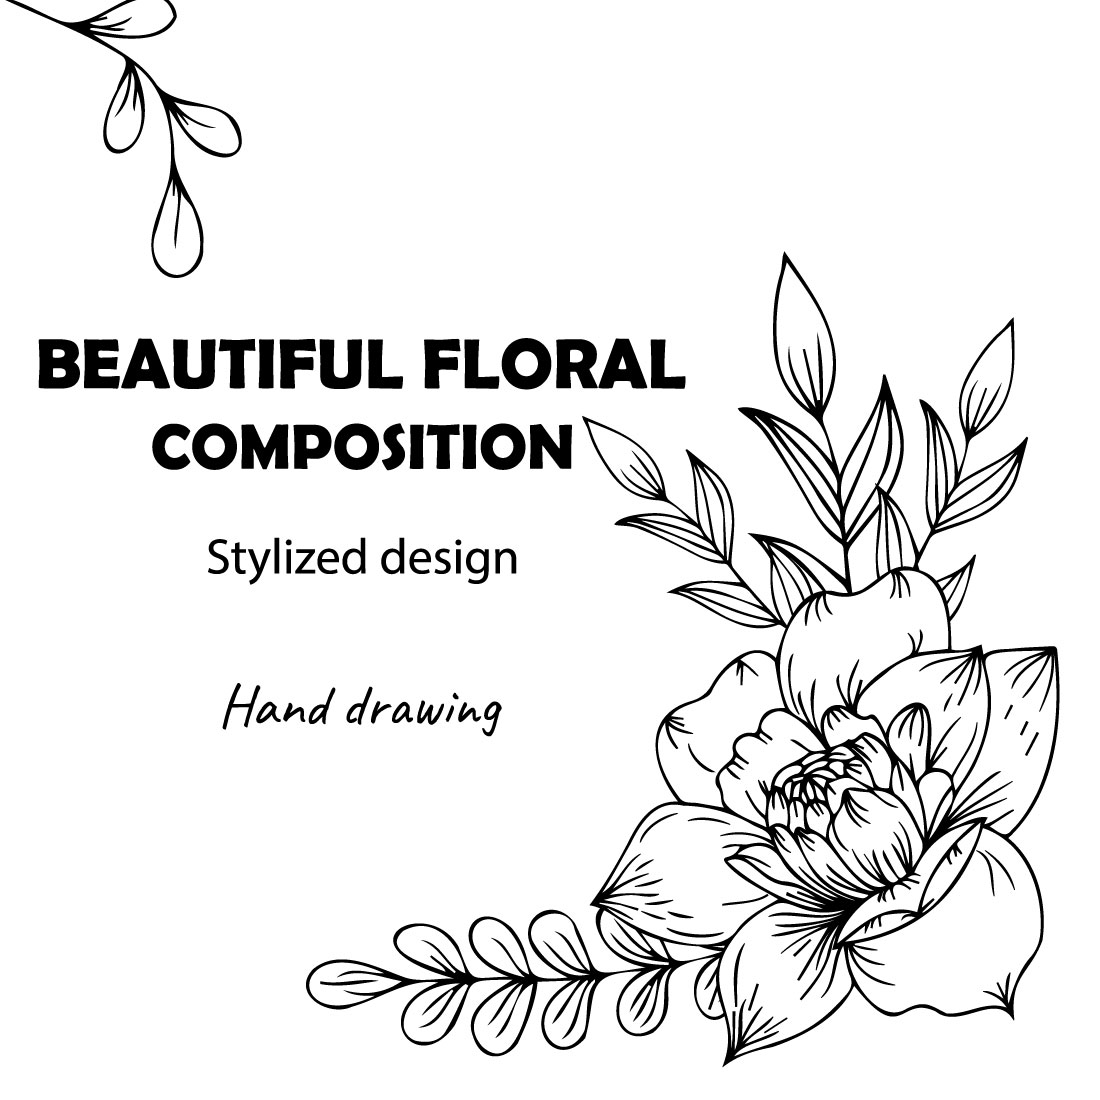 Decorative Flower Line Art. Floral Composition. Hand Drawing cover image.